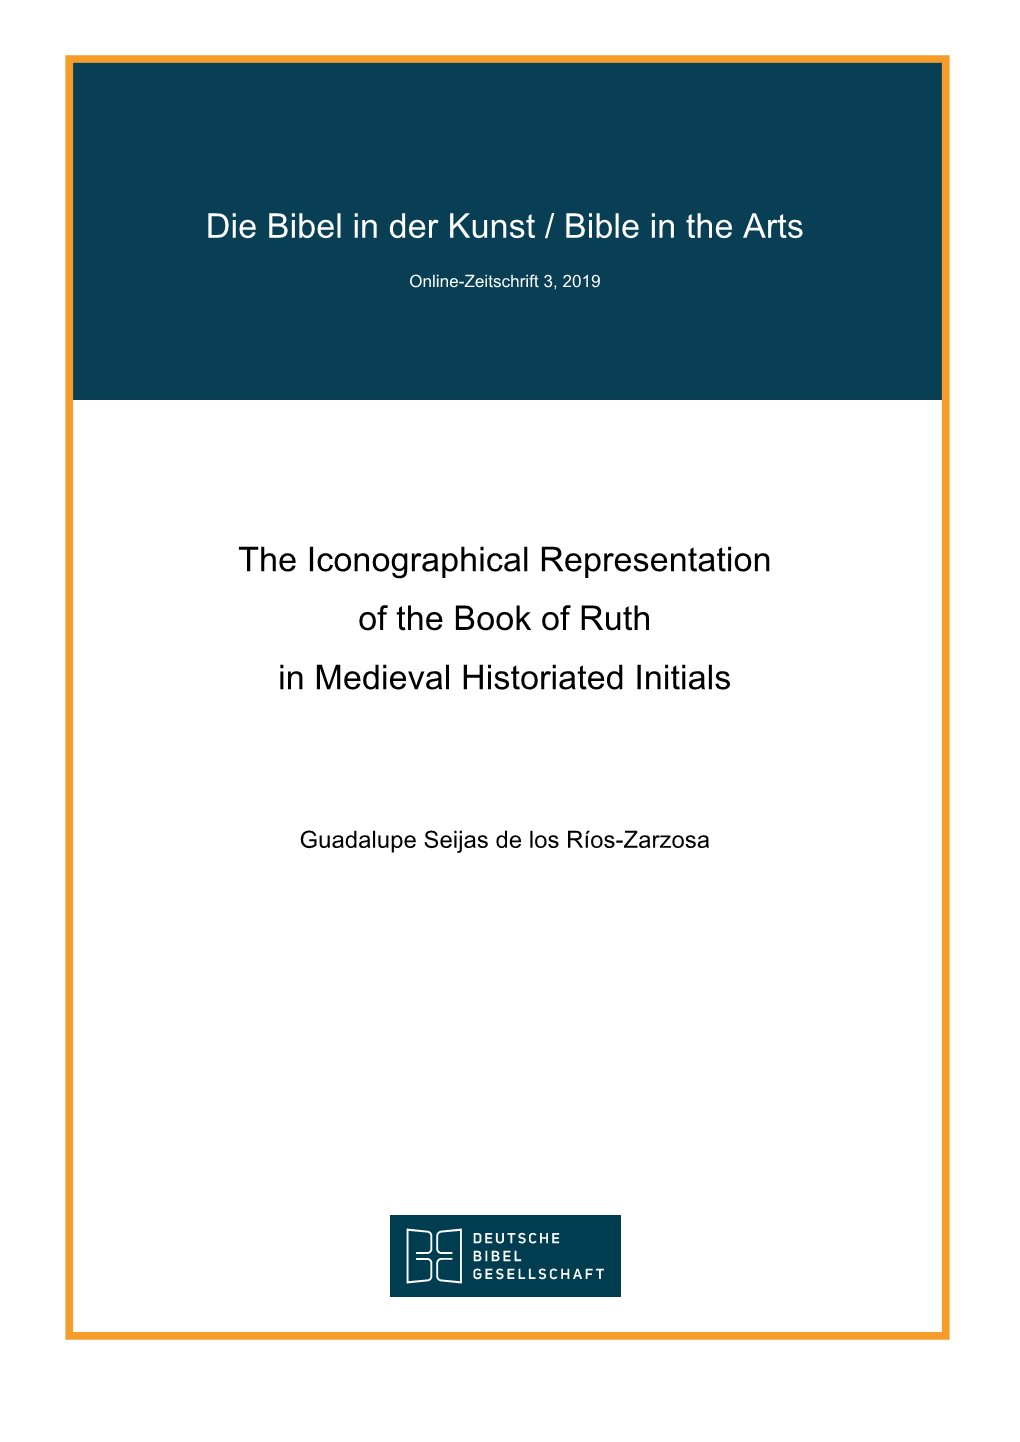 Die Bibel in Der Kunst / Bible in the Arts the Iconographical